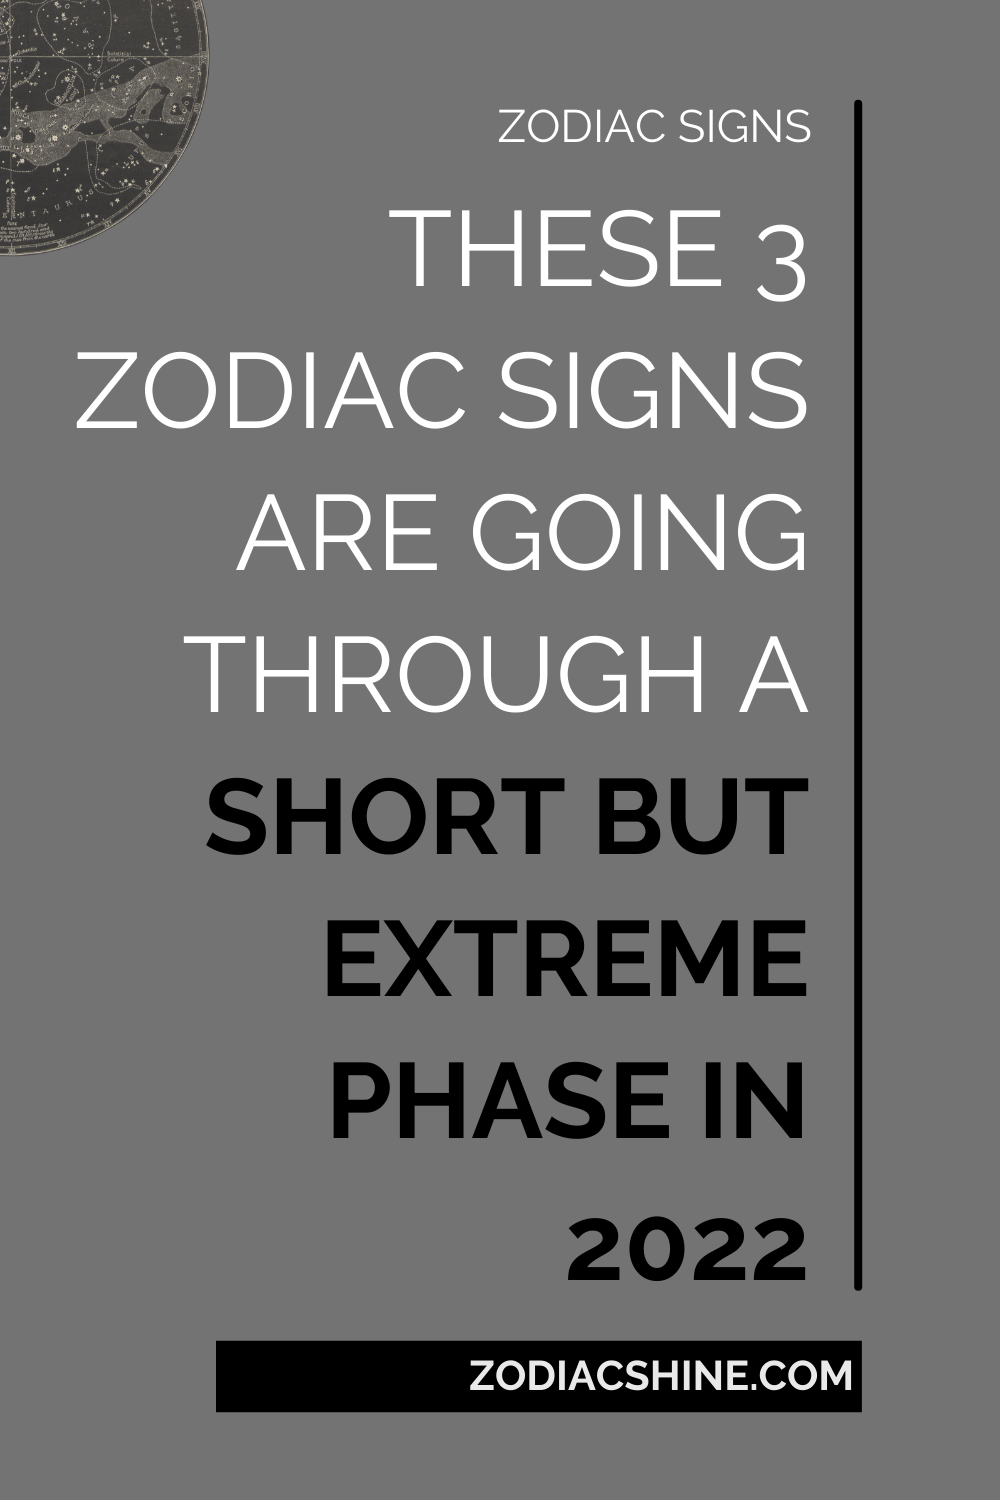 These 3 Zodiac Signs Are Going Through A Short But Extreme Phase In 2022